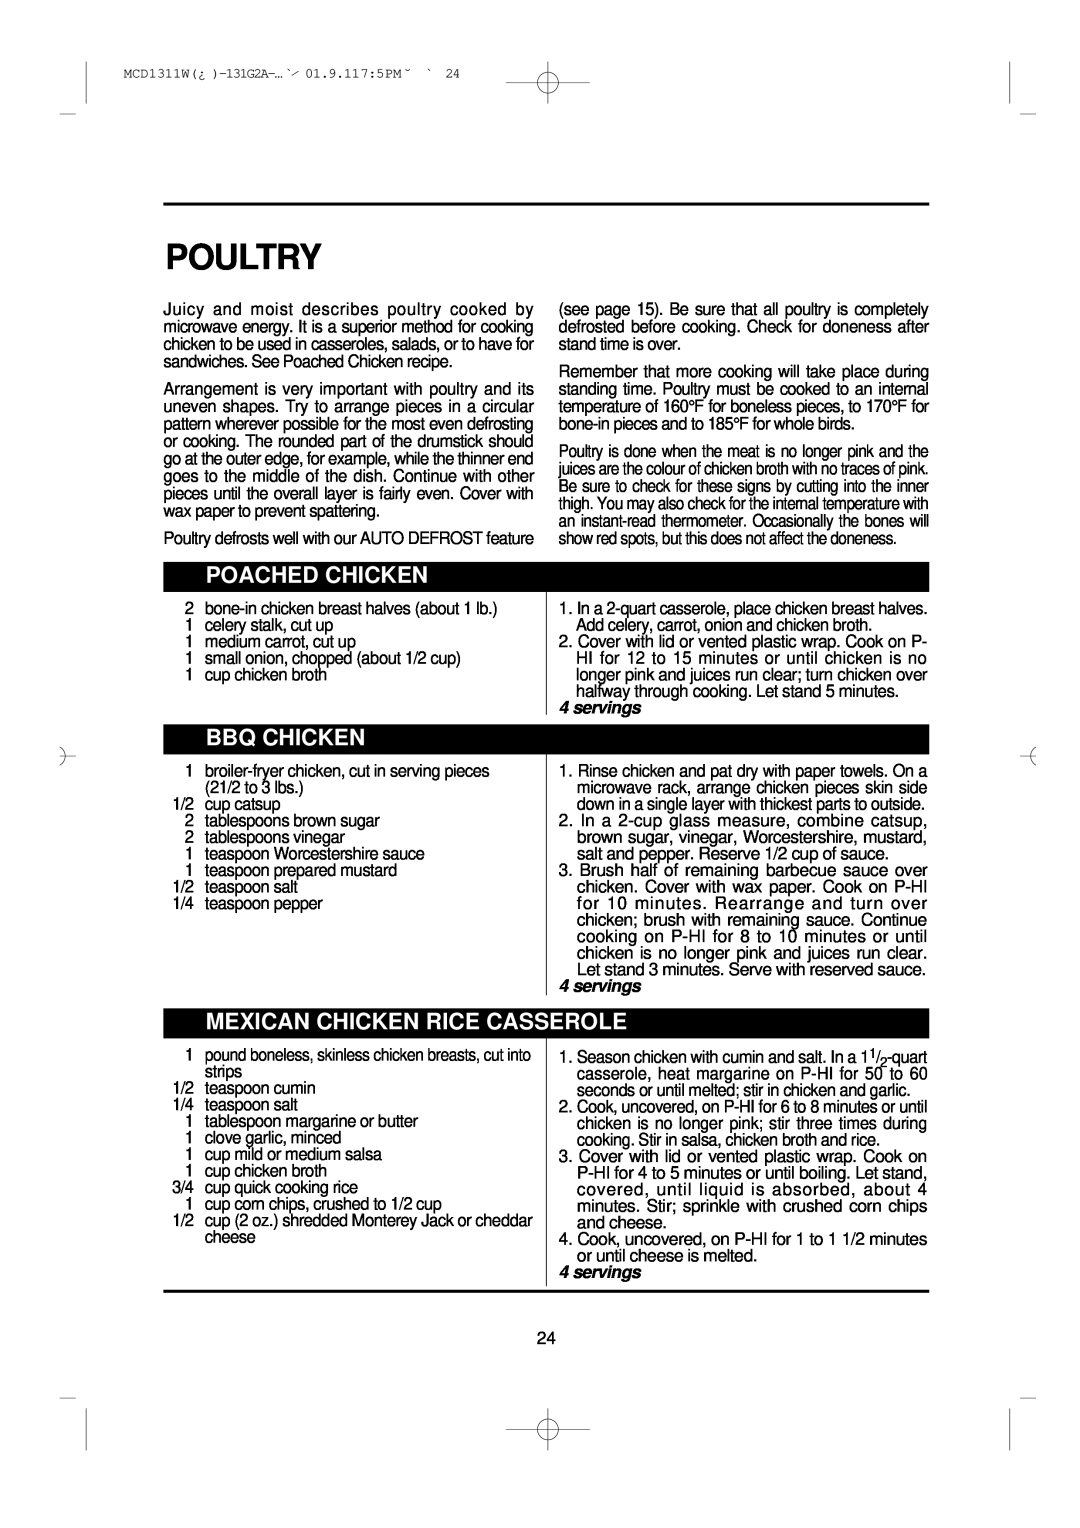 Magic Chef MCD1311W instruction manual Poultry, Poached Chicken, Bbq Chicken, Mexican Chicken Rice Casserole, servings 